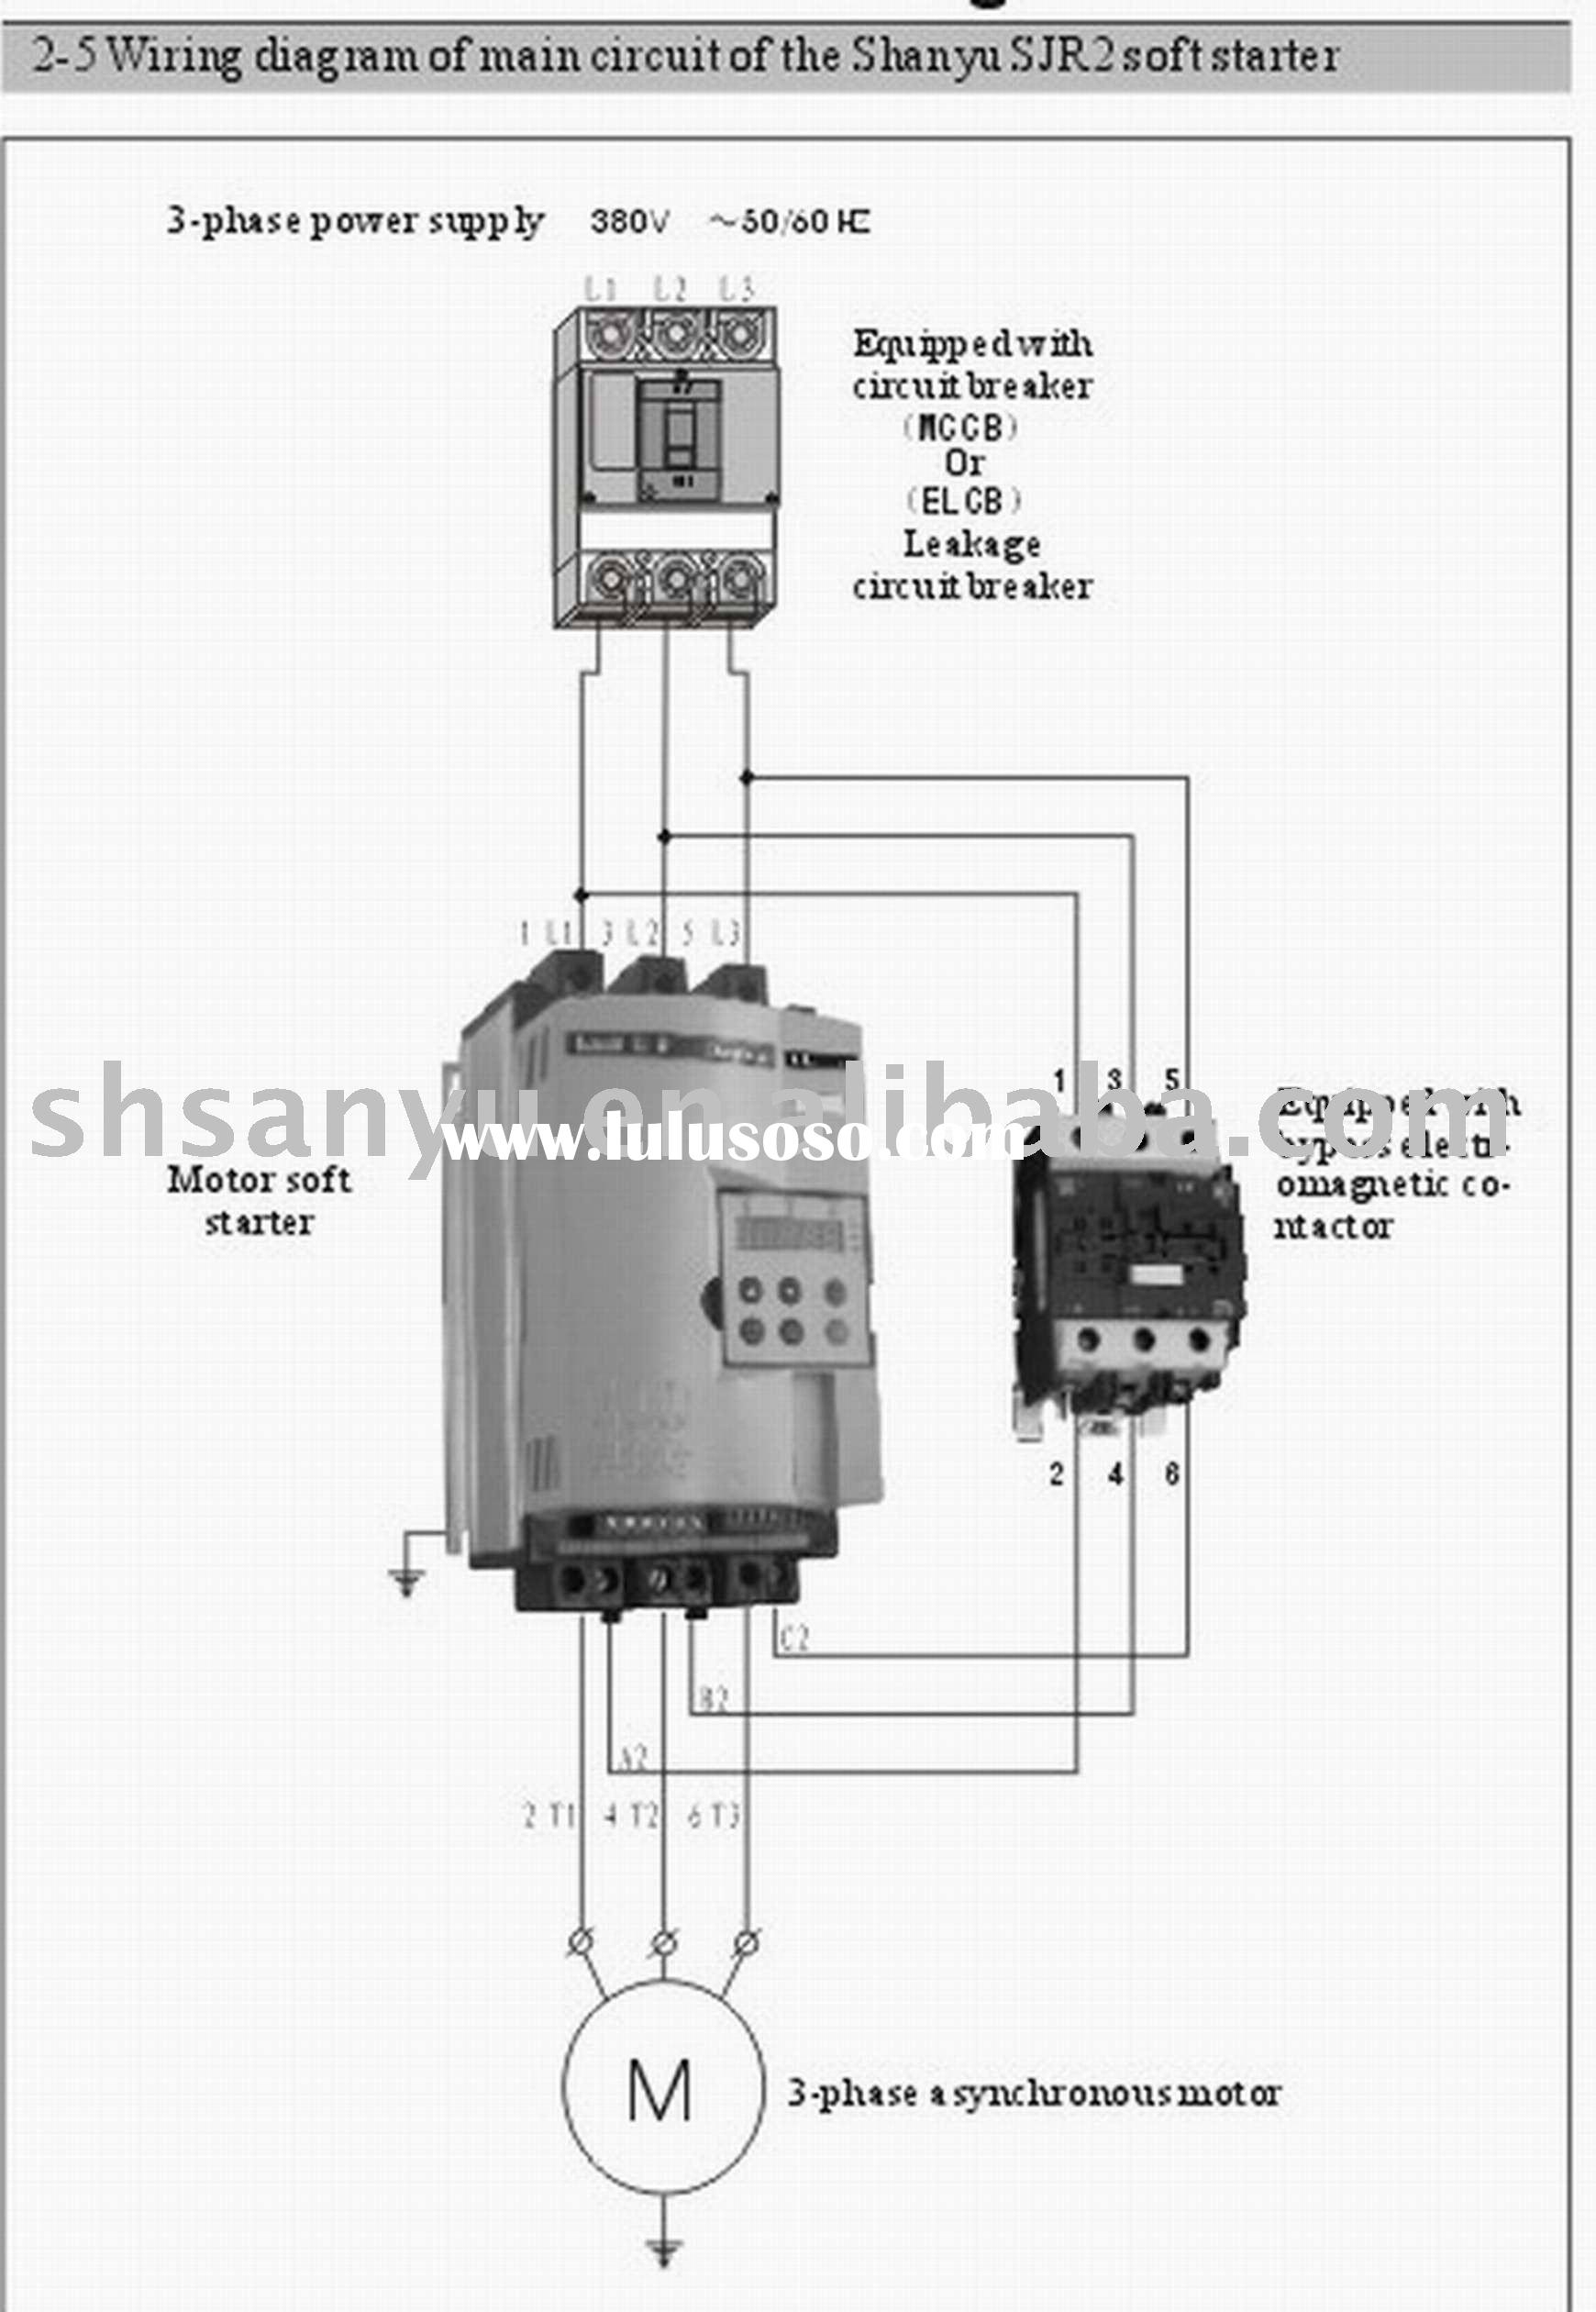 Emerson Wiring Diagram For Water Pumps | Wiring Diagram - Emerson Electric Motors Wiring Diagram